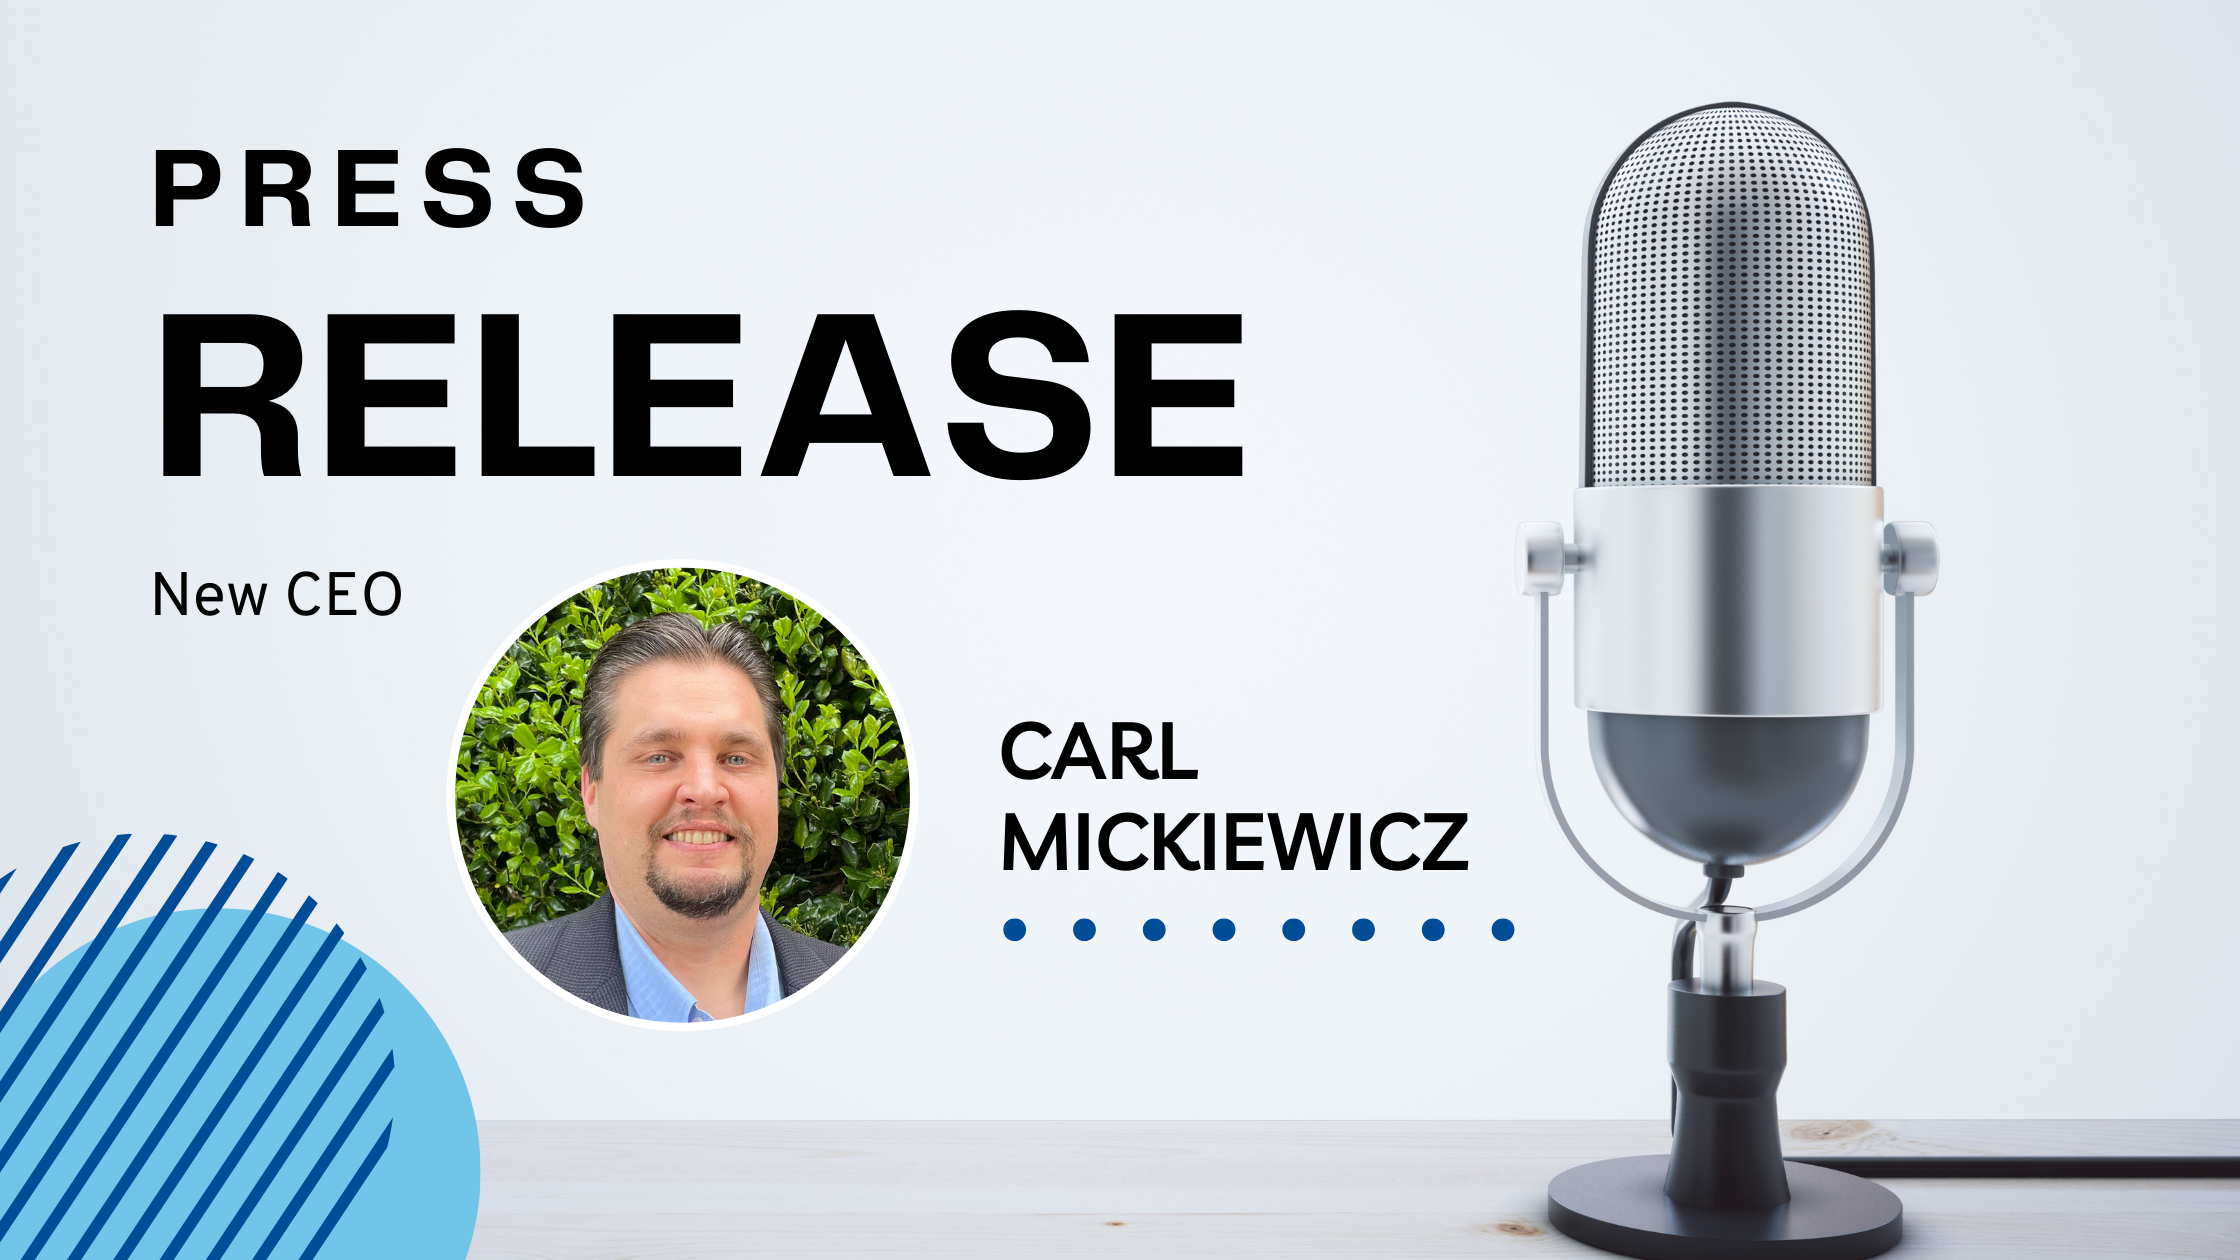 [PR] Prime Care Tech Announces New Chief Executive Officer, Carl Mickiewicz